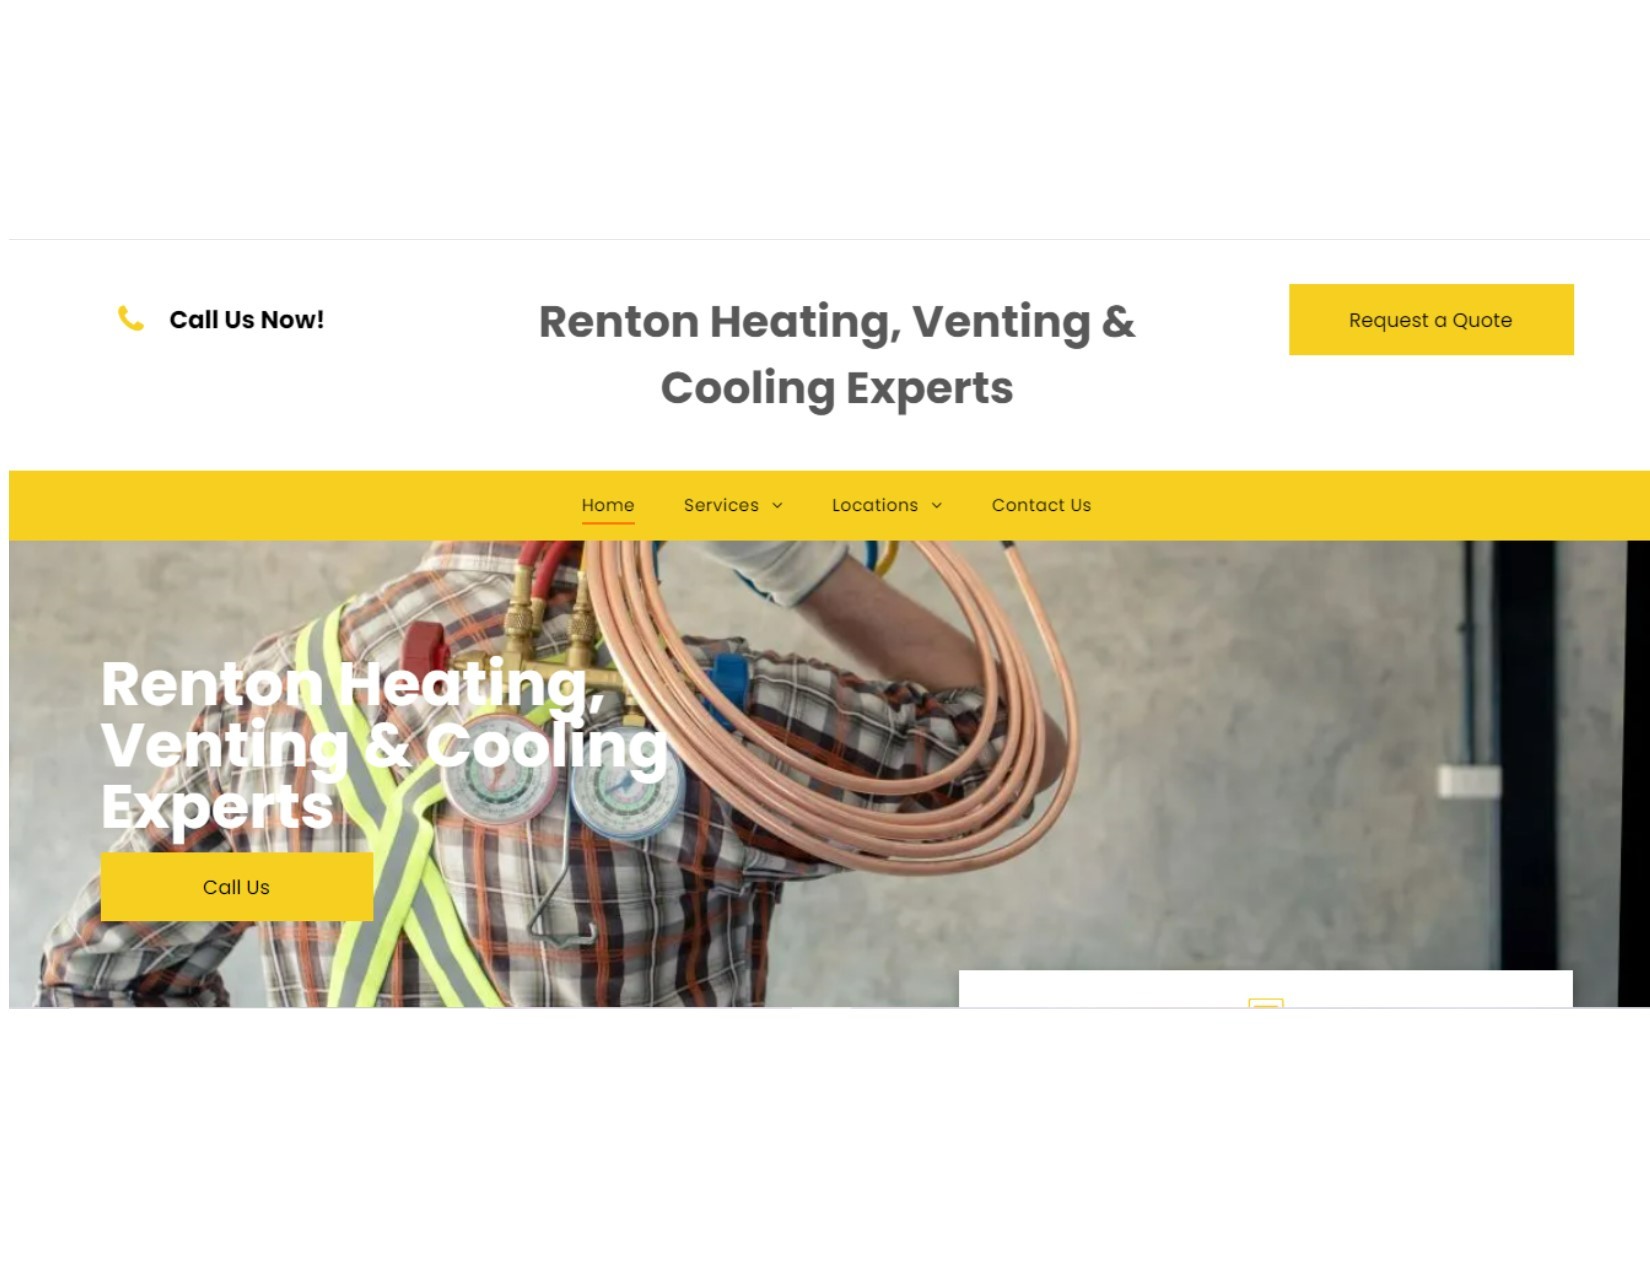 Renton Heating, Venting & Cooling Experts